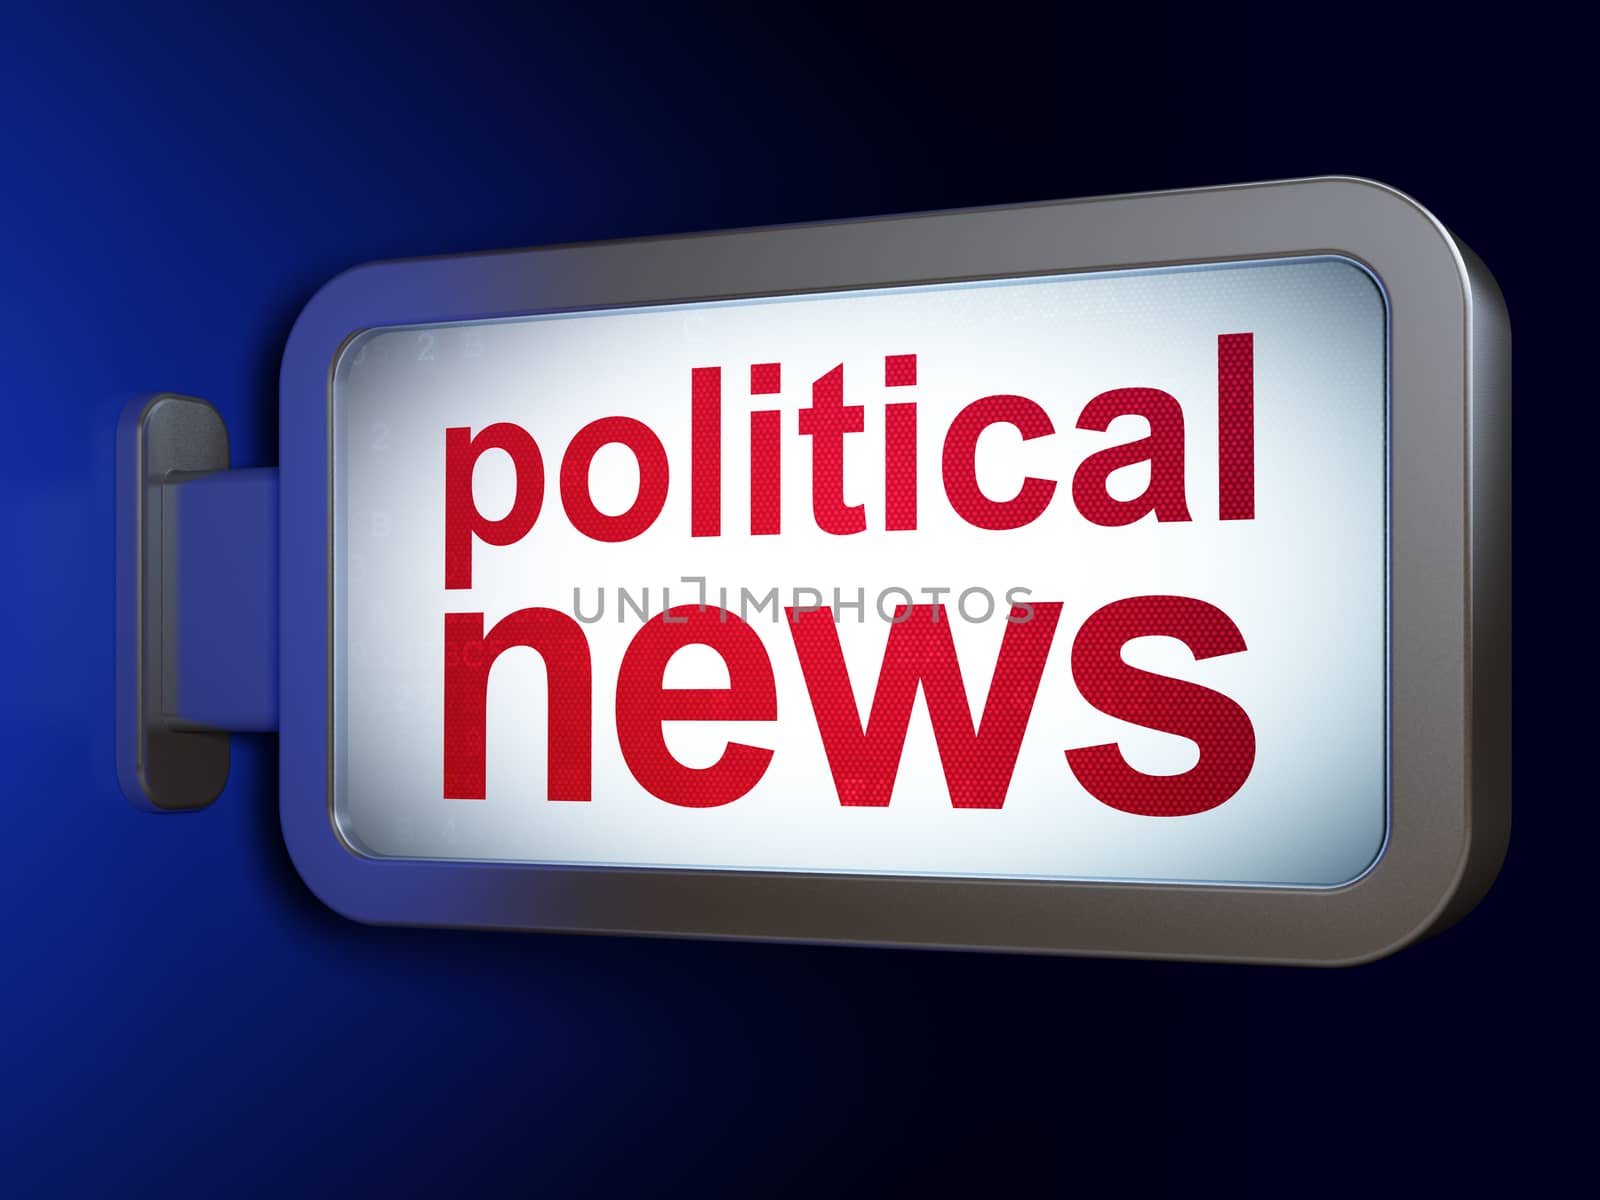 News concept: Political News on advertising billboard background, 3D rendering